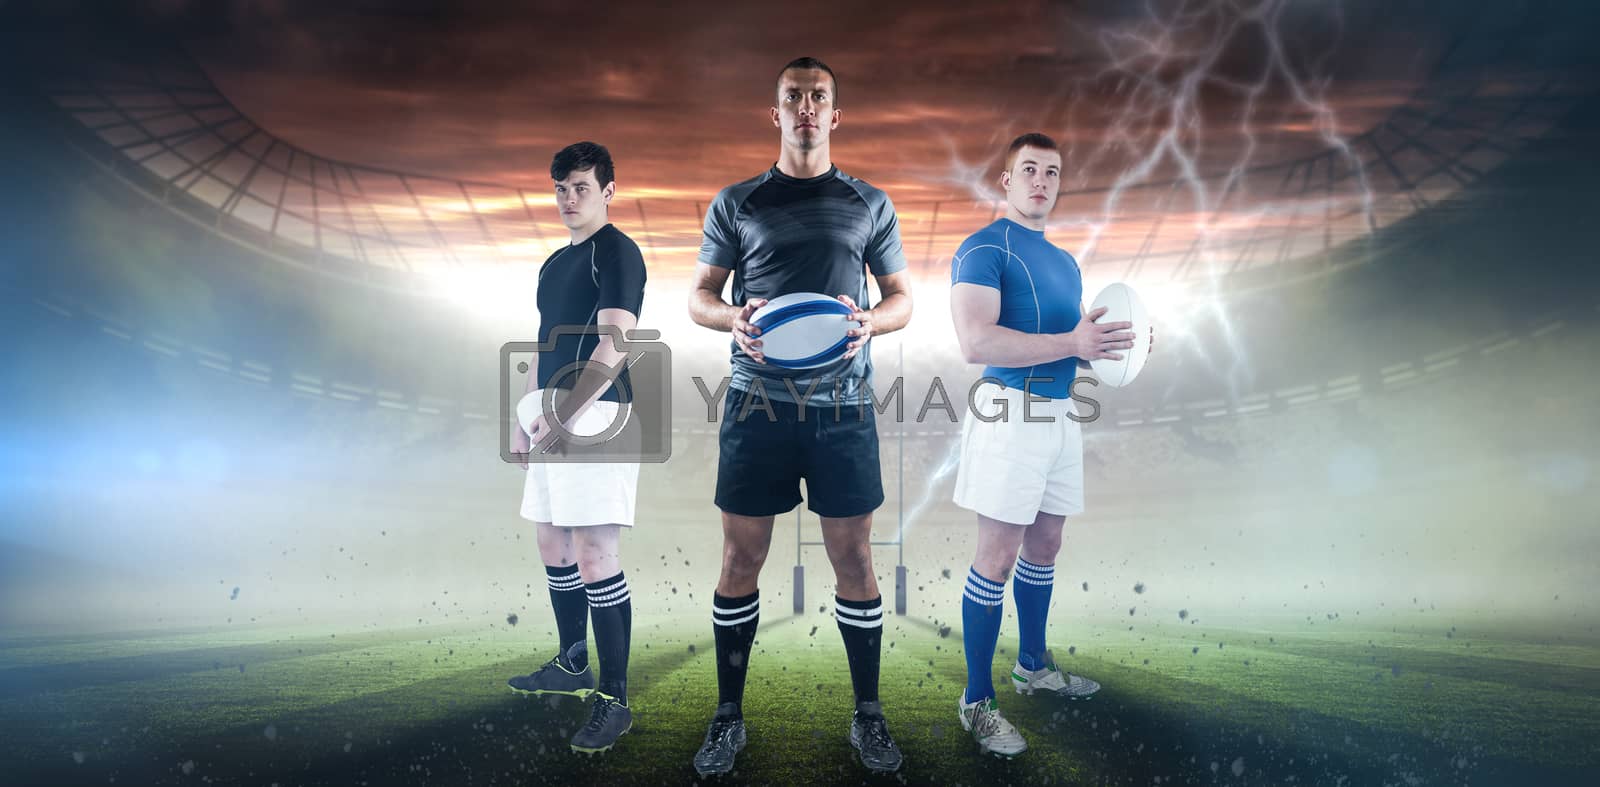 Royalty free image of Composite image of rugby player holding rugby ball by Wavebreakmedia